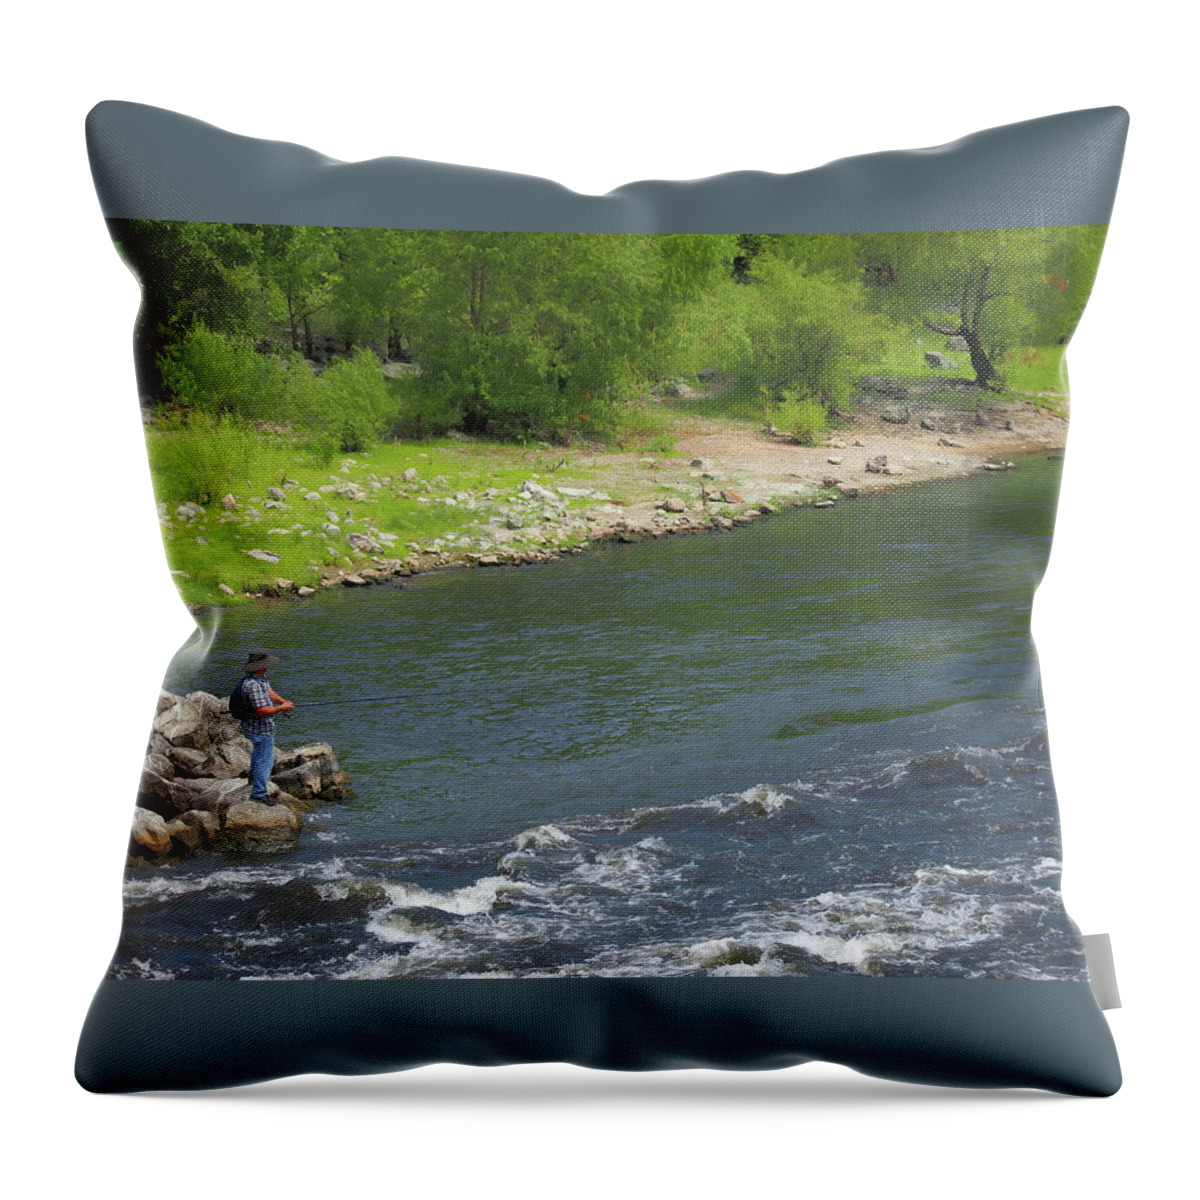 Water Throw Pillow featuring the photograph The Fisher by C Winslow Shafer